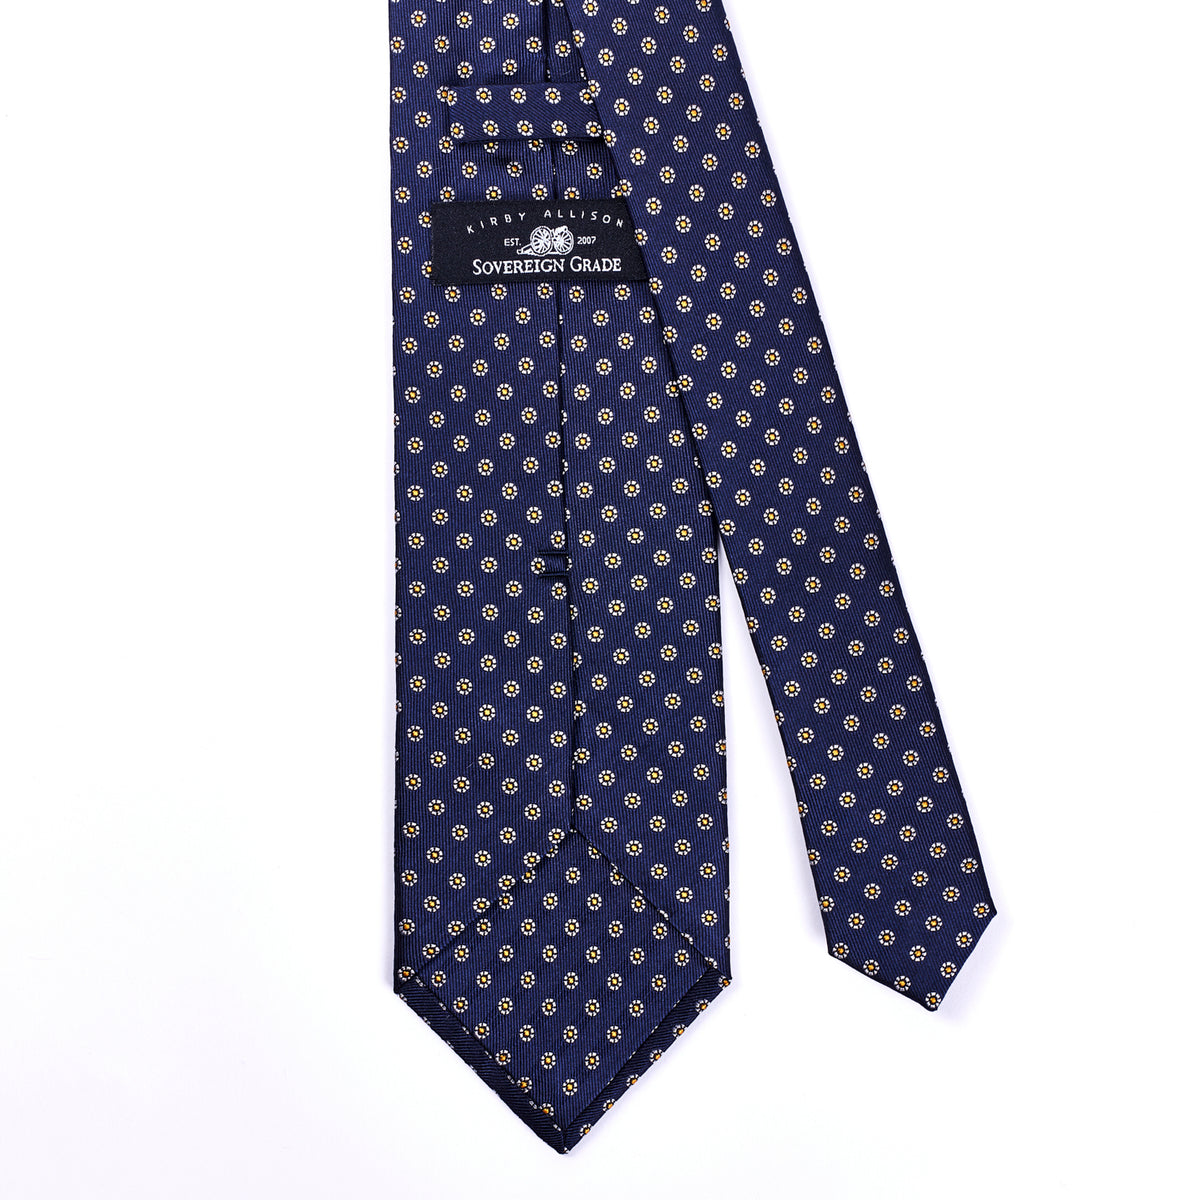 A high-quality Sovereign Grade Midnight Navy Floral Jacquard Tie, 150 cm by KirbyAllison.com on a white background.